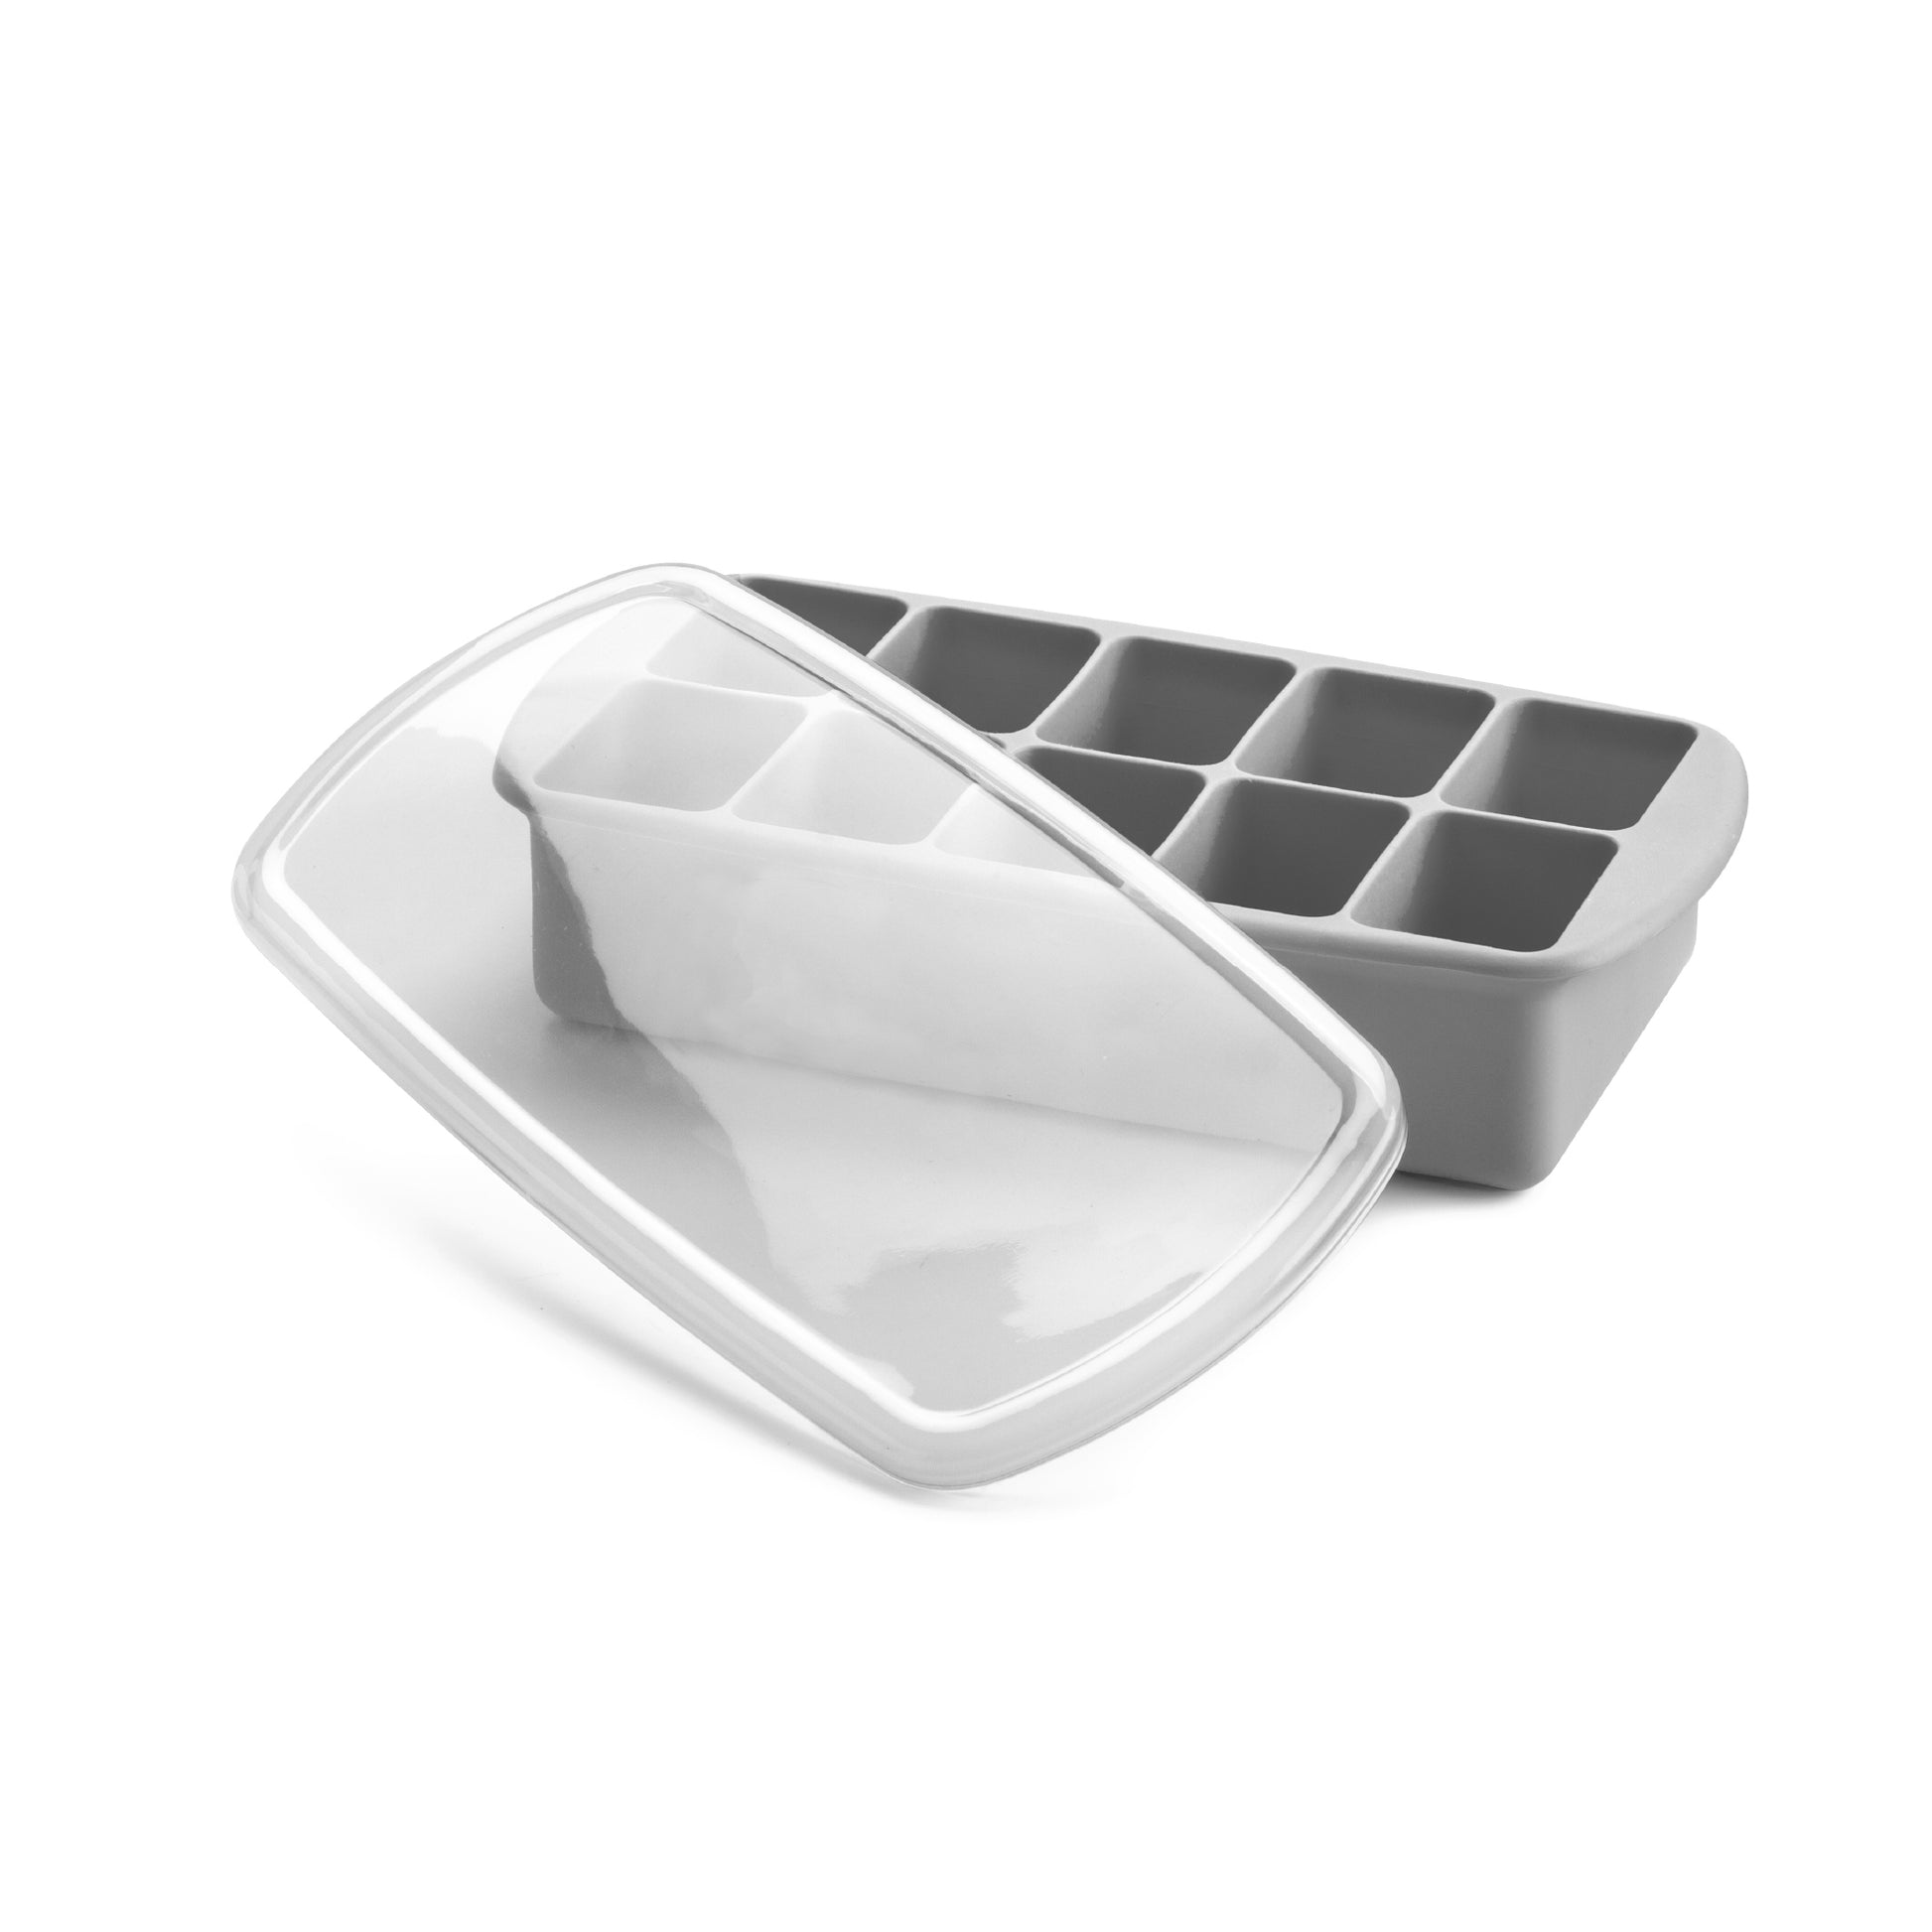 melii Baby Food Prep Silicone Tray with Lid Grey - BPA-Free, Versatile, Stackable for Convenient Freezing and Odor Protection